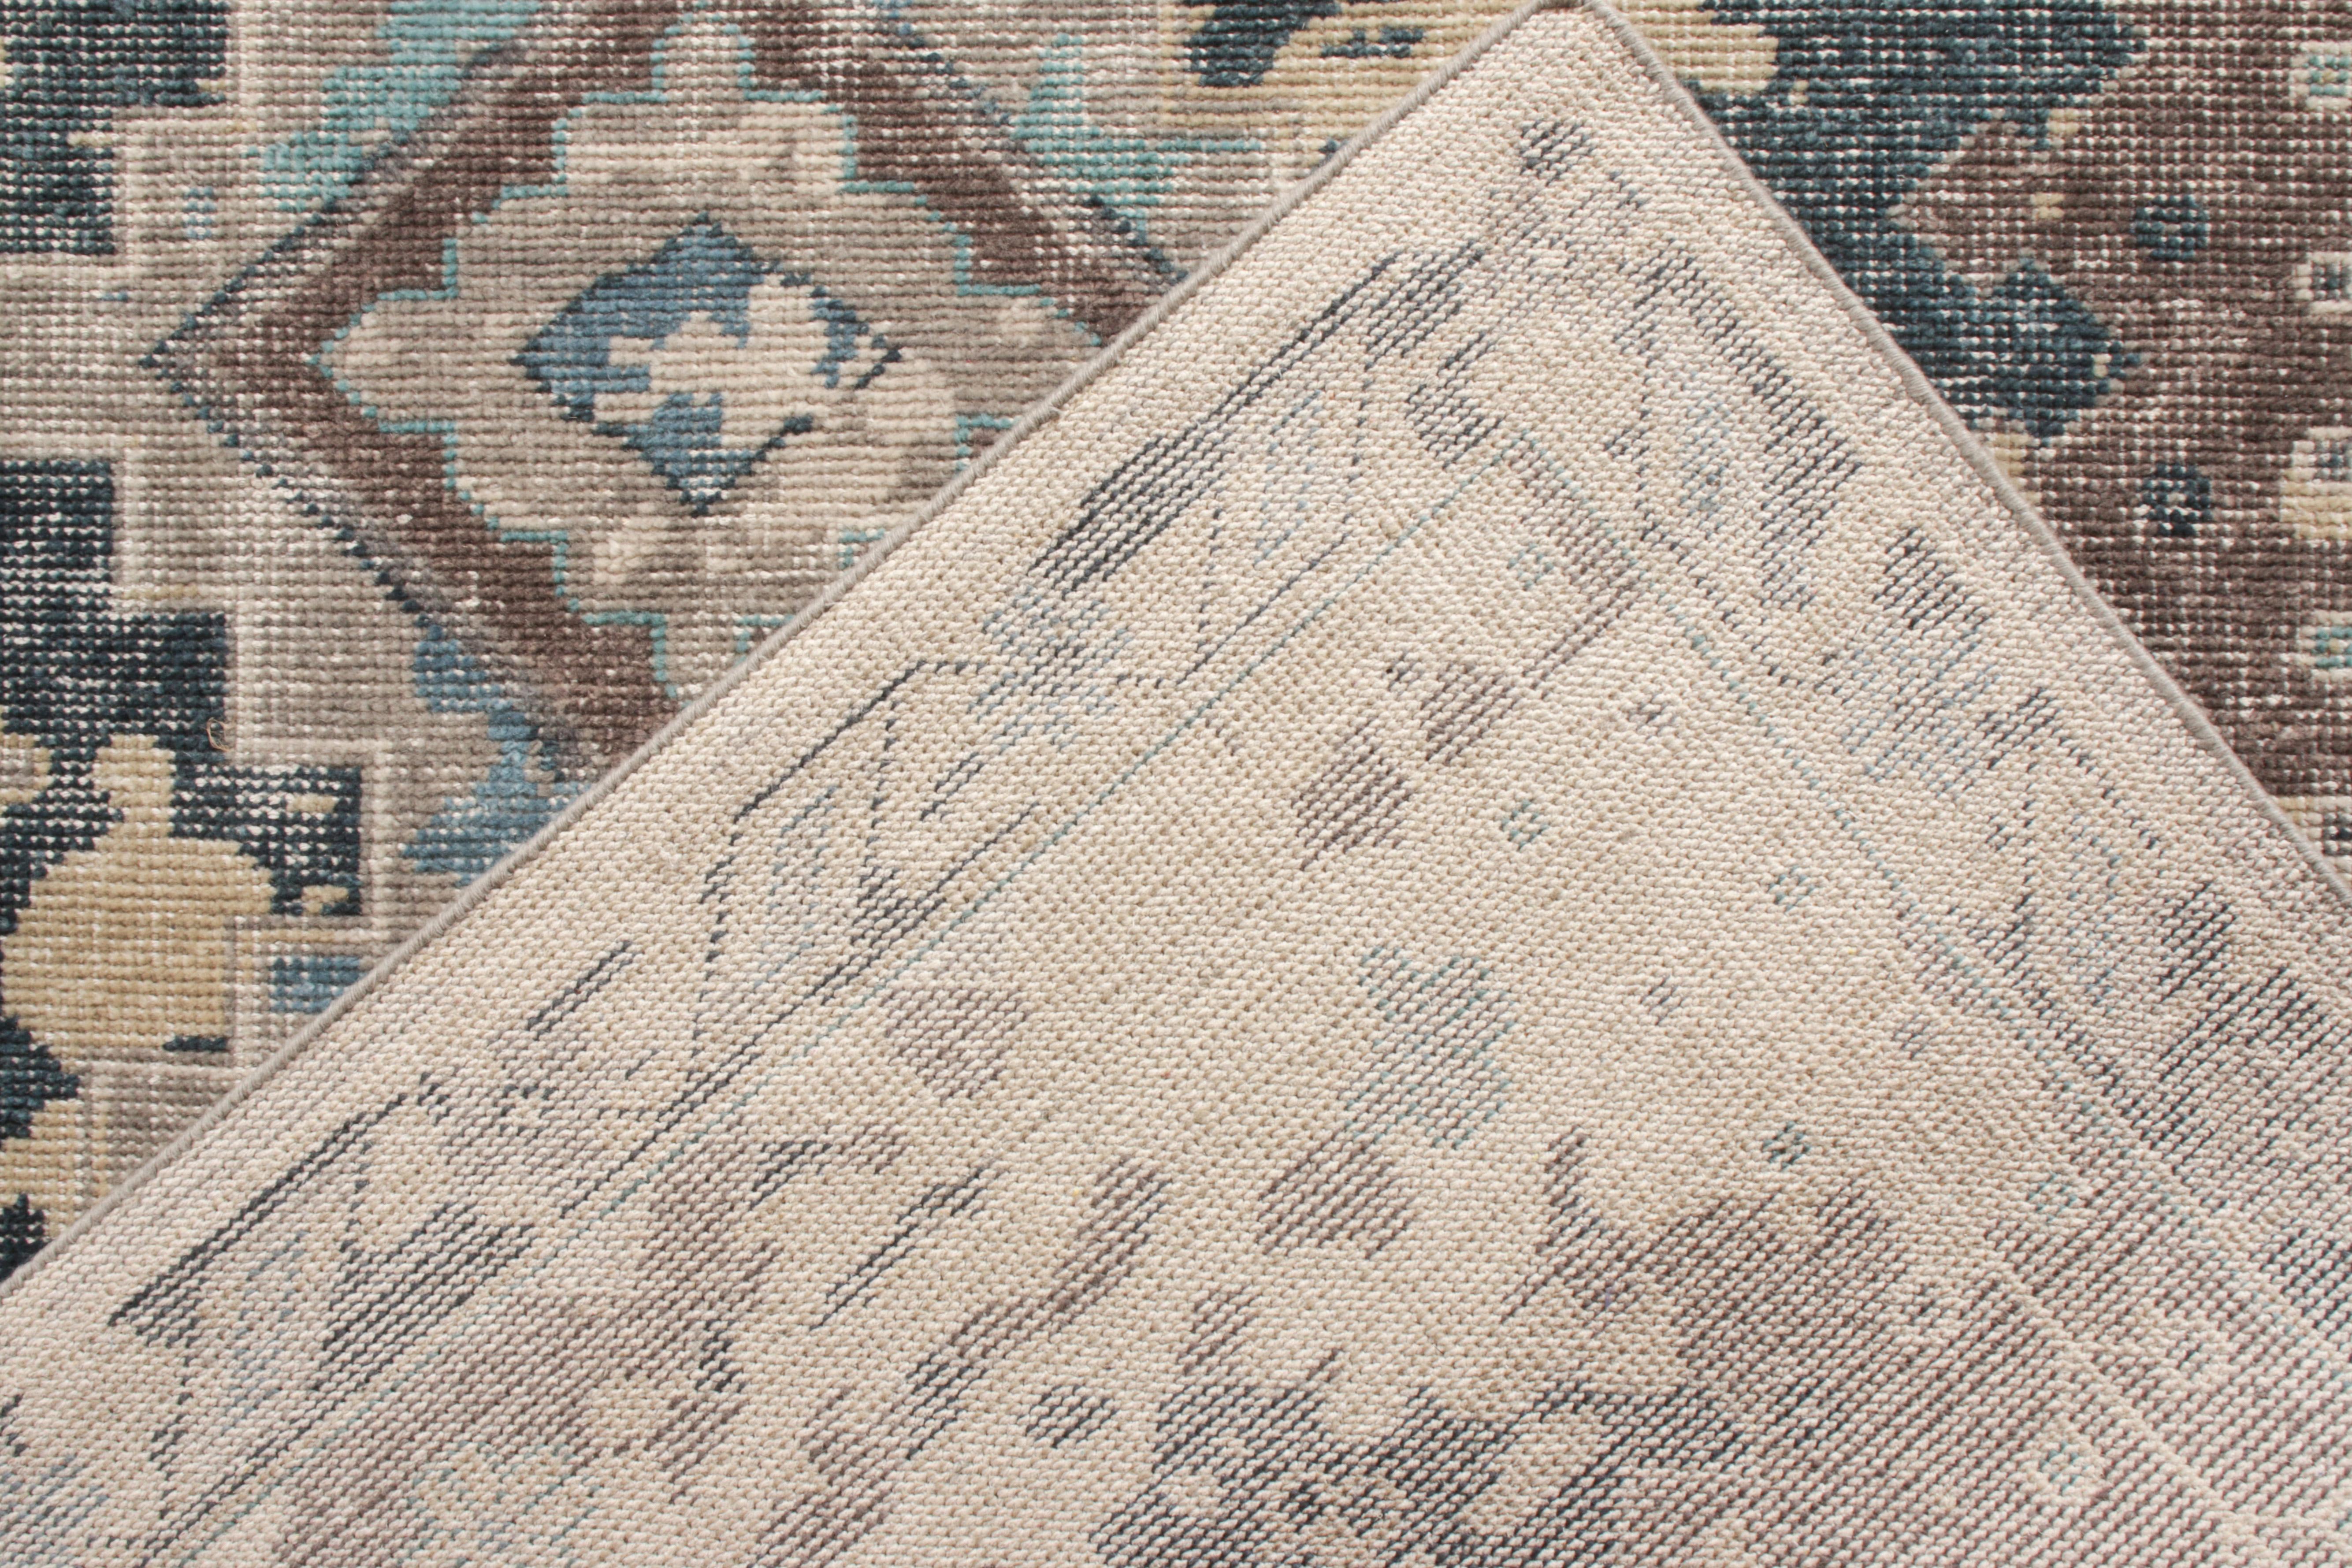 Hand-Knotted Rug & Kilim’s Distressed Style Rug in Blue, Beige-Brown Geometric Pattern For Sale